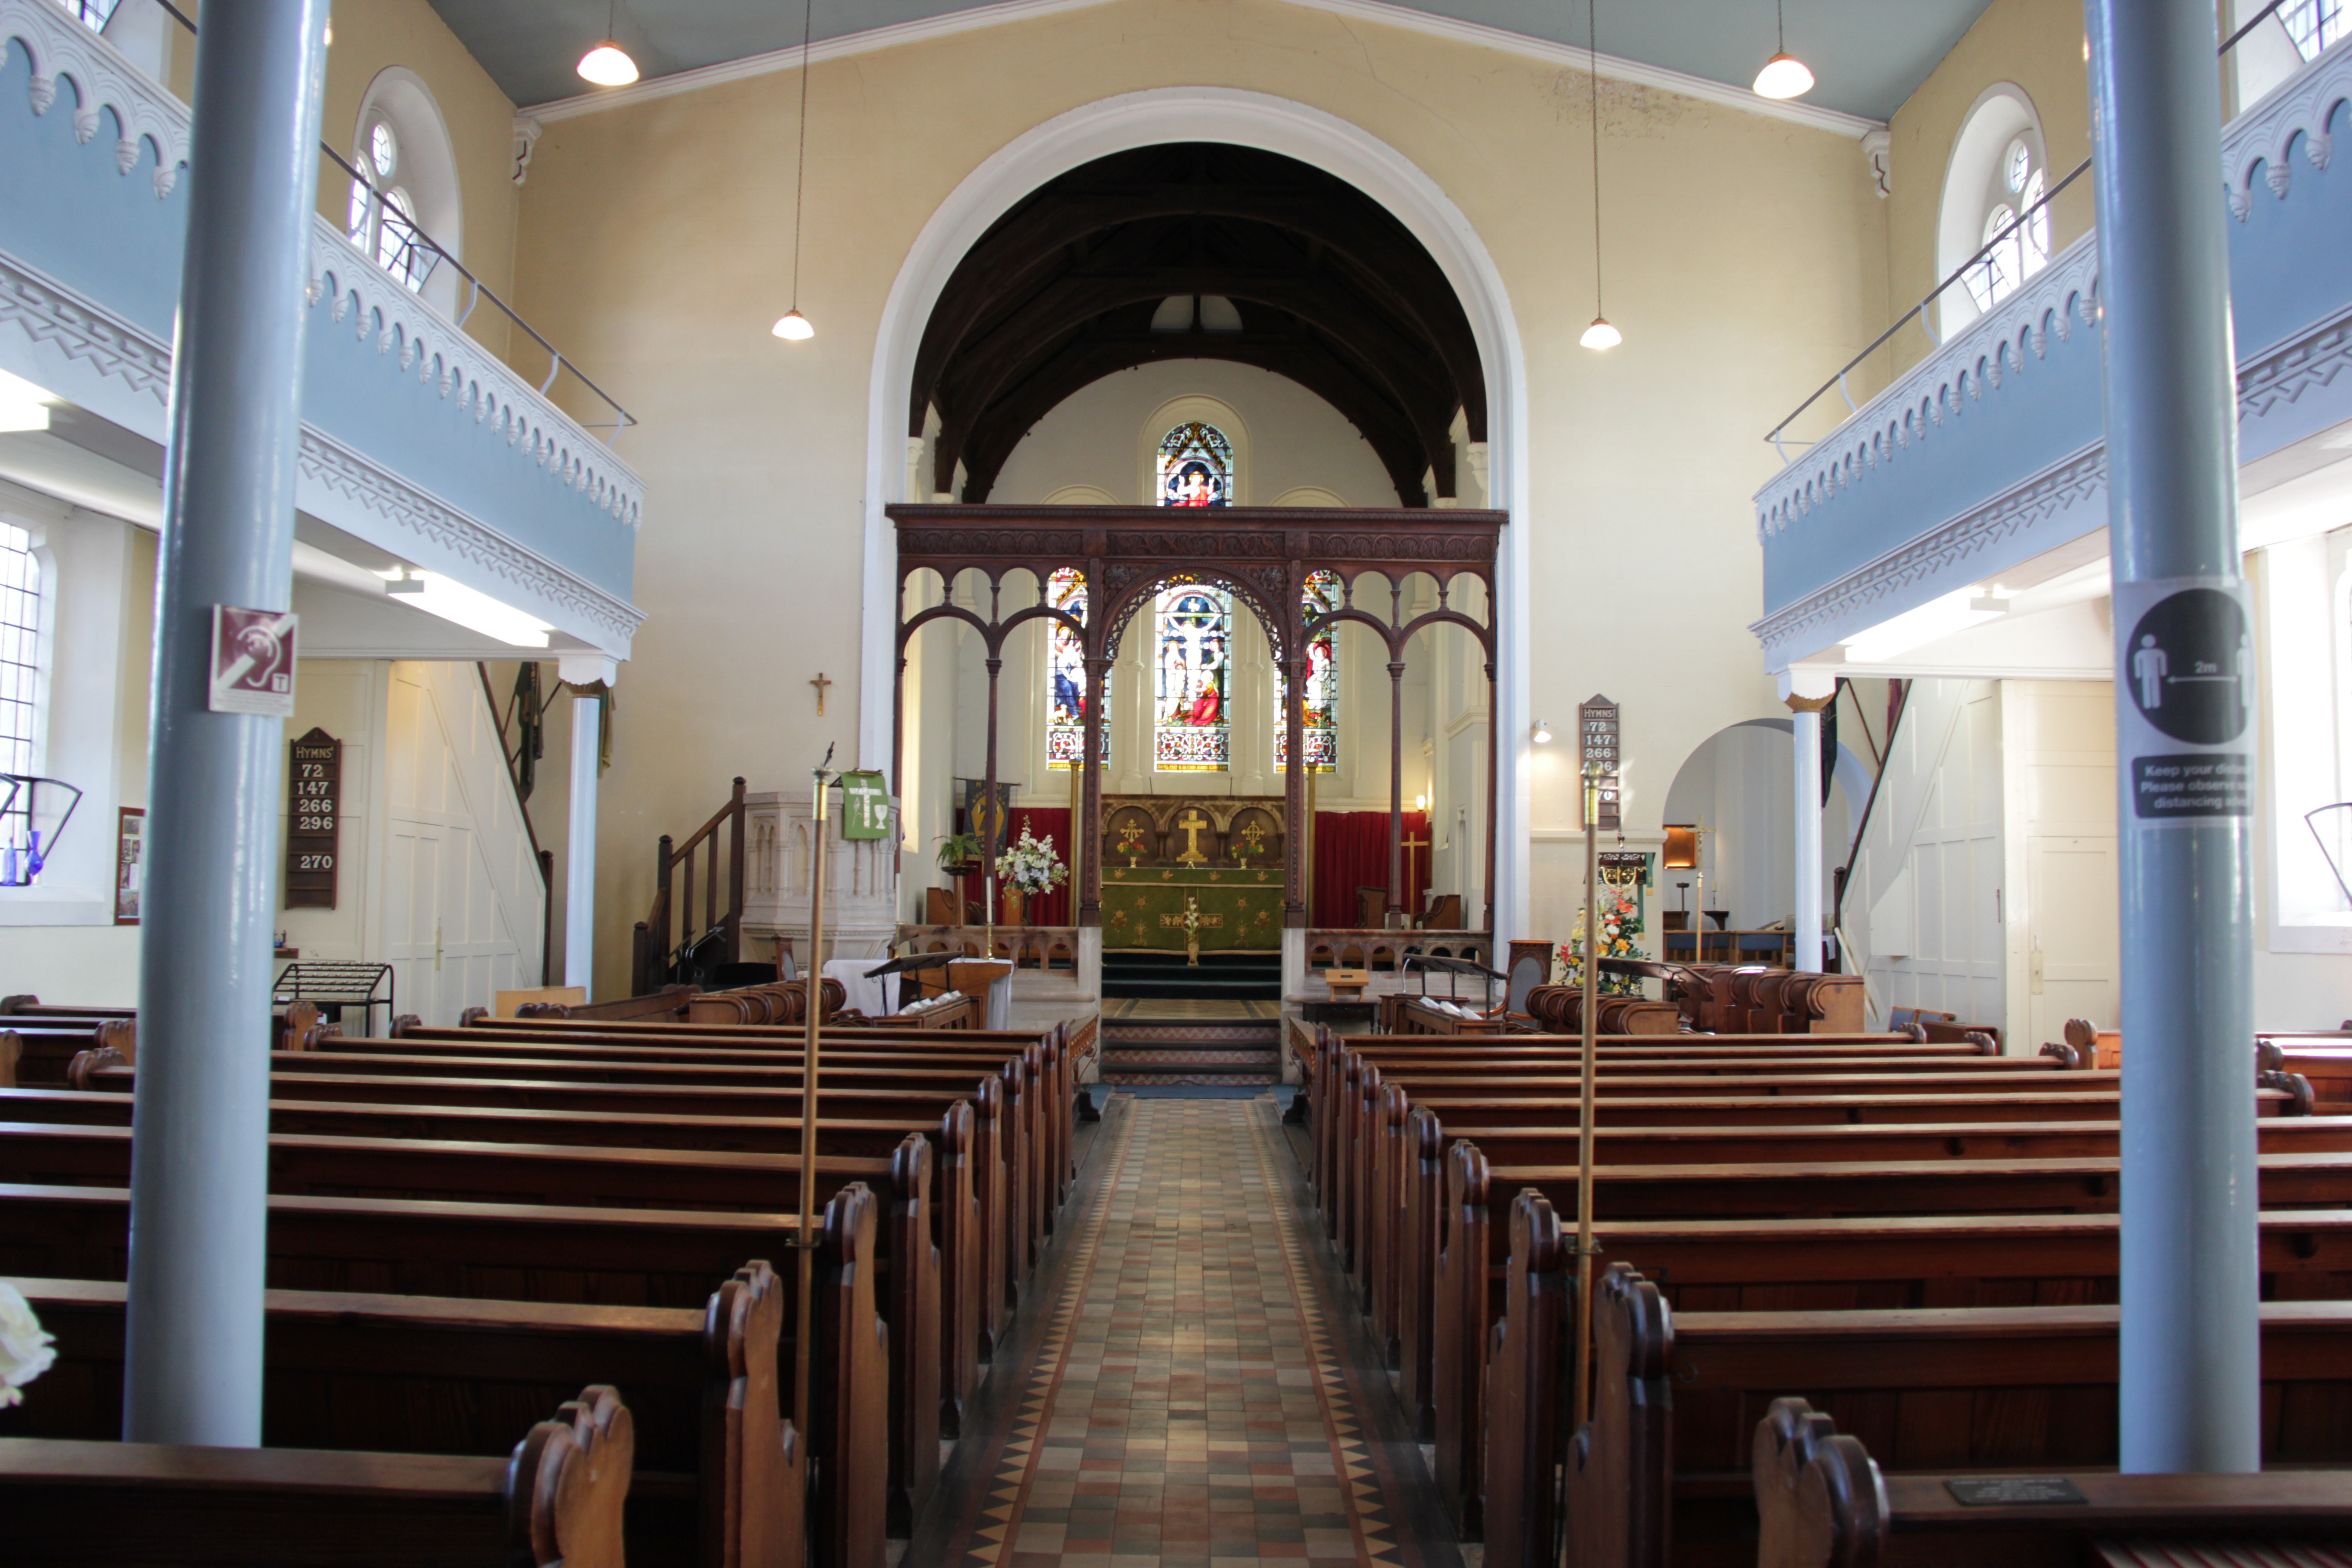 The inside of St Clement's Church in Worcester, looking towards the altar